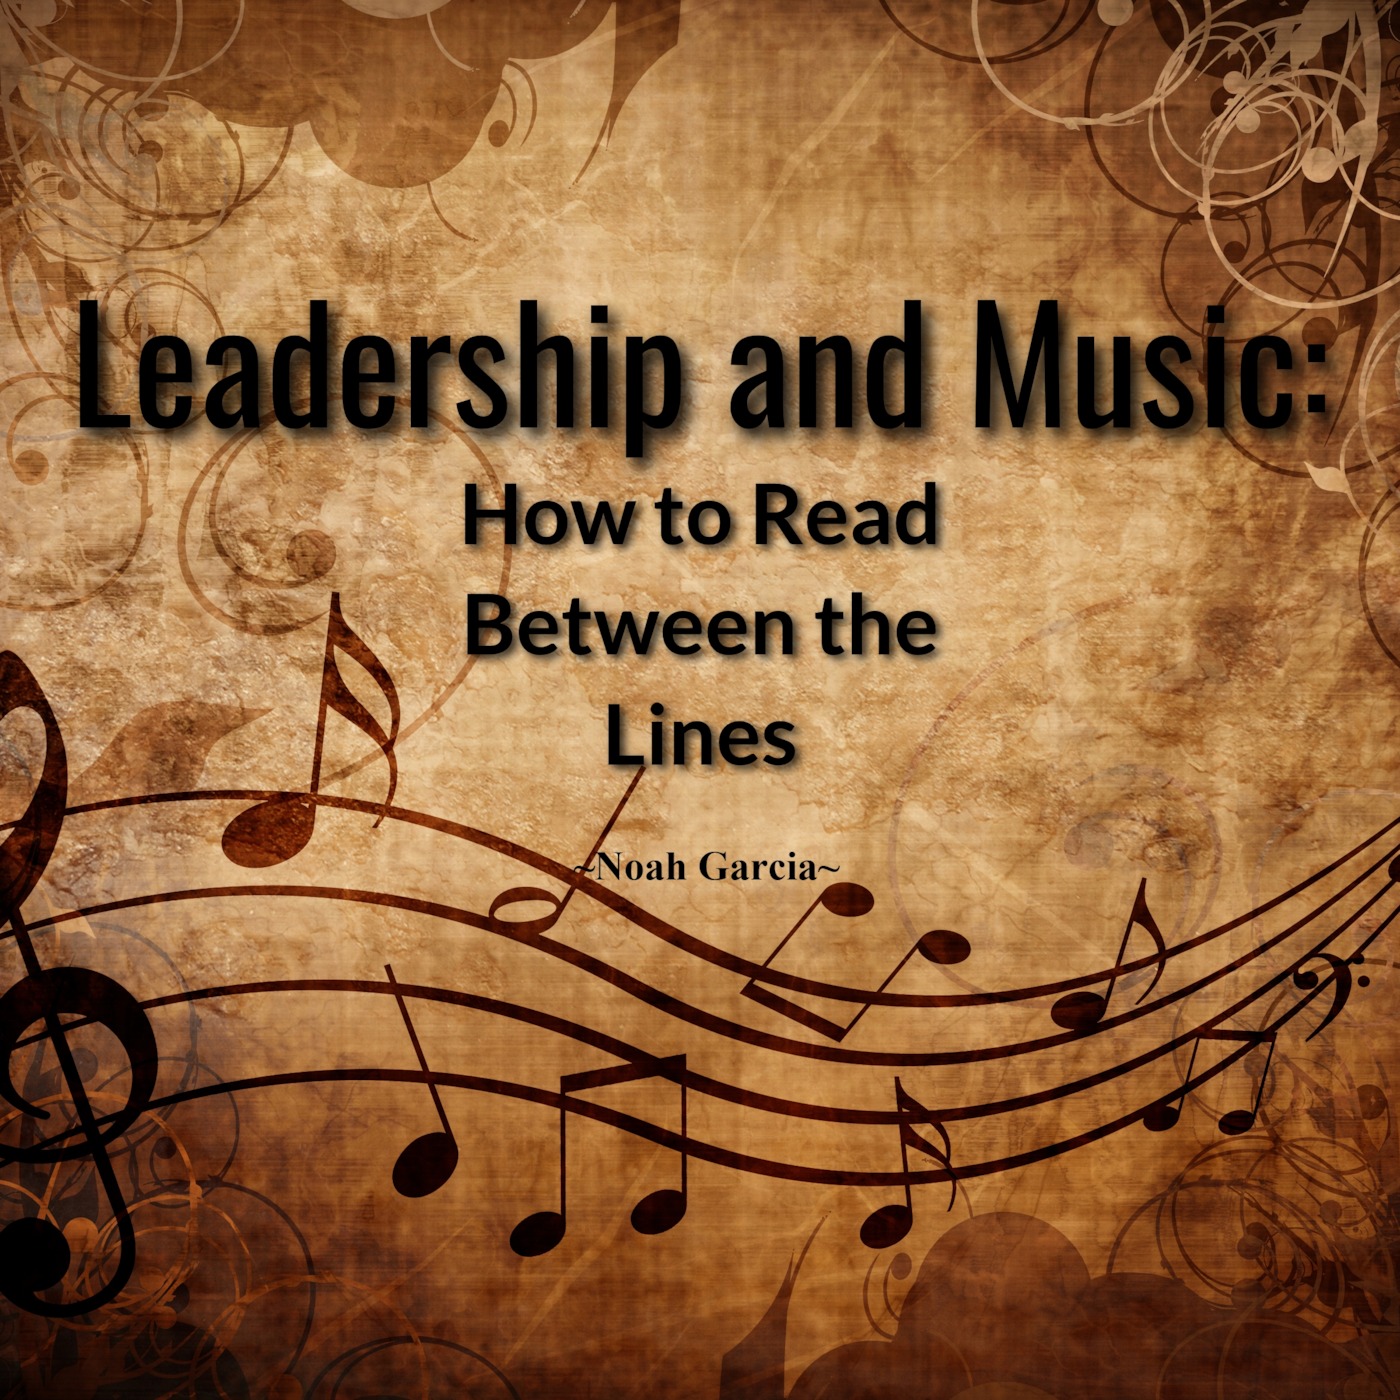 Leadership and Music: How to Read Between the Lines